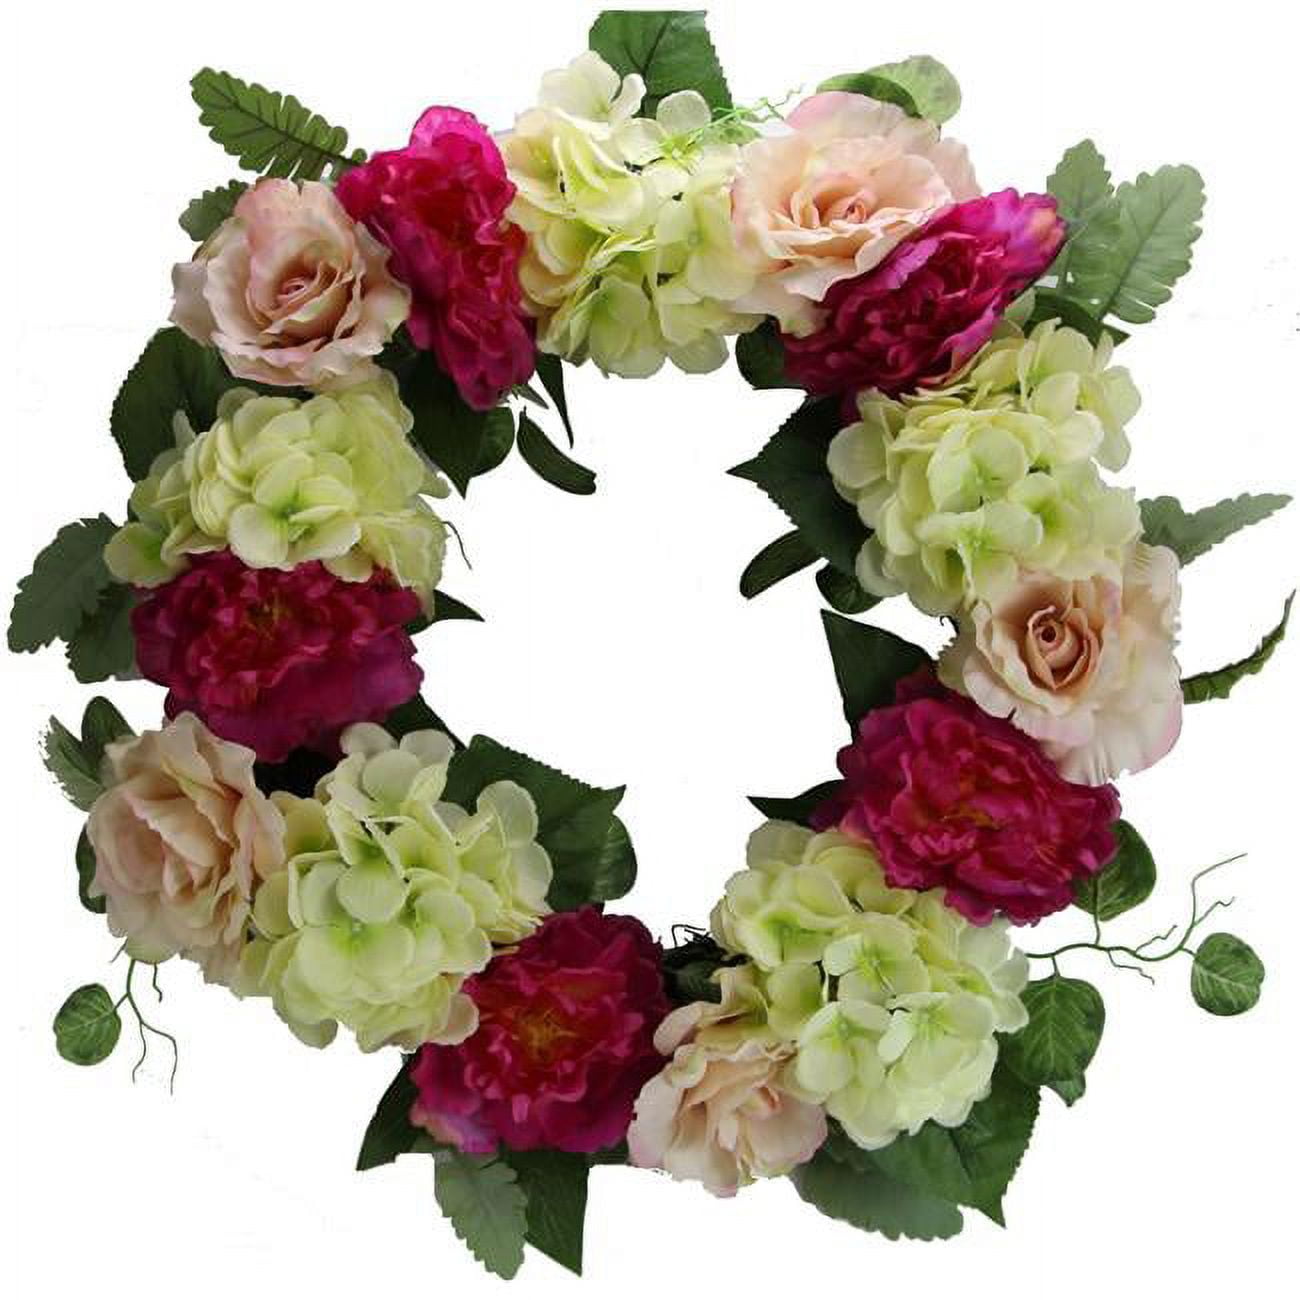 Admired By Nature Abn1w003-ntrl Artificial 24 In. Peony, Rose & Hydreangea Wreath - Multi Color